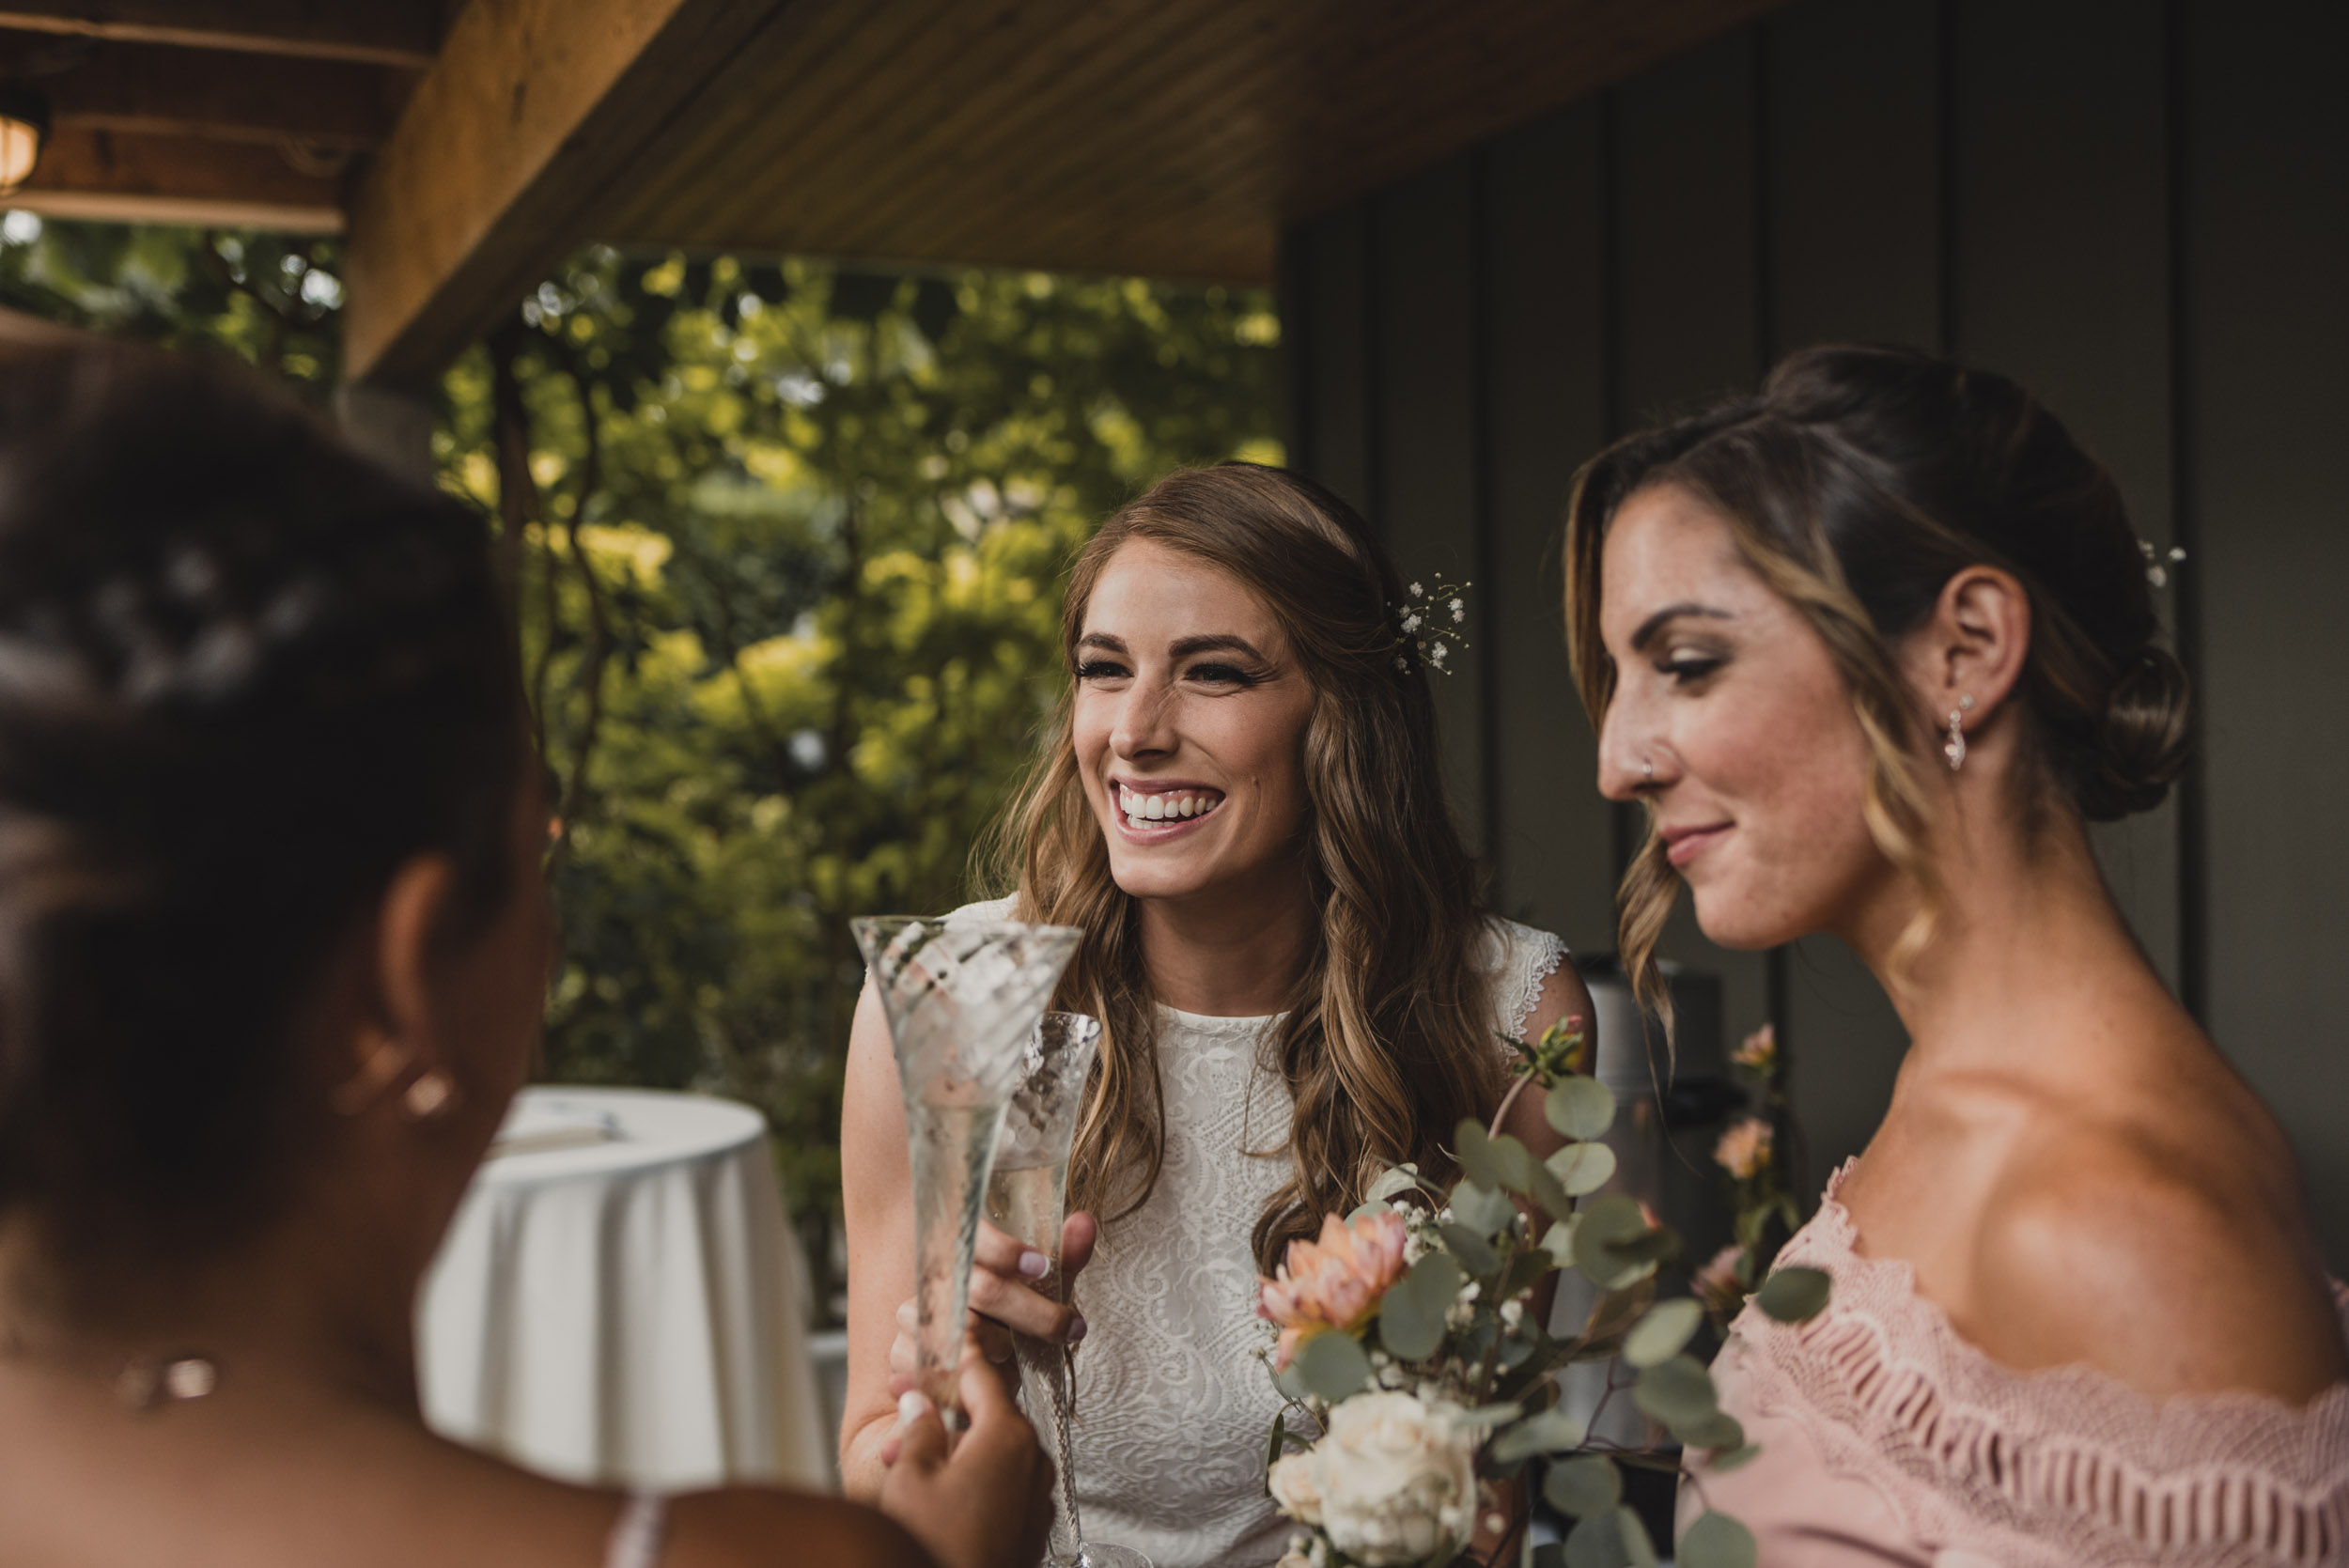 Bride laughs with friends